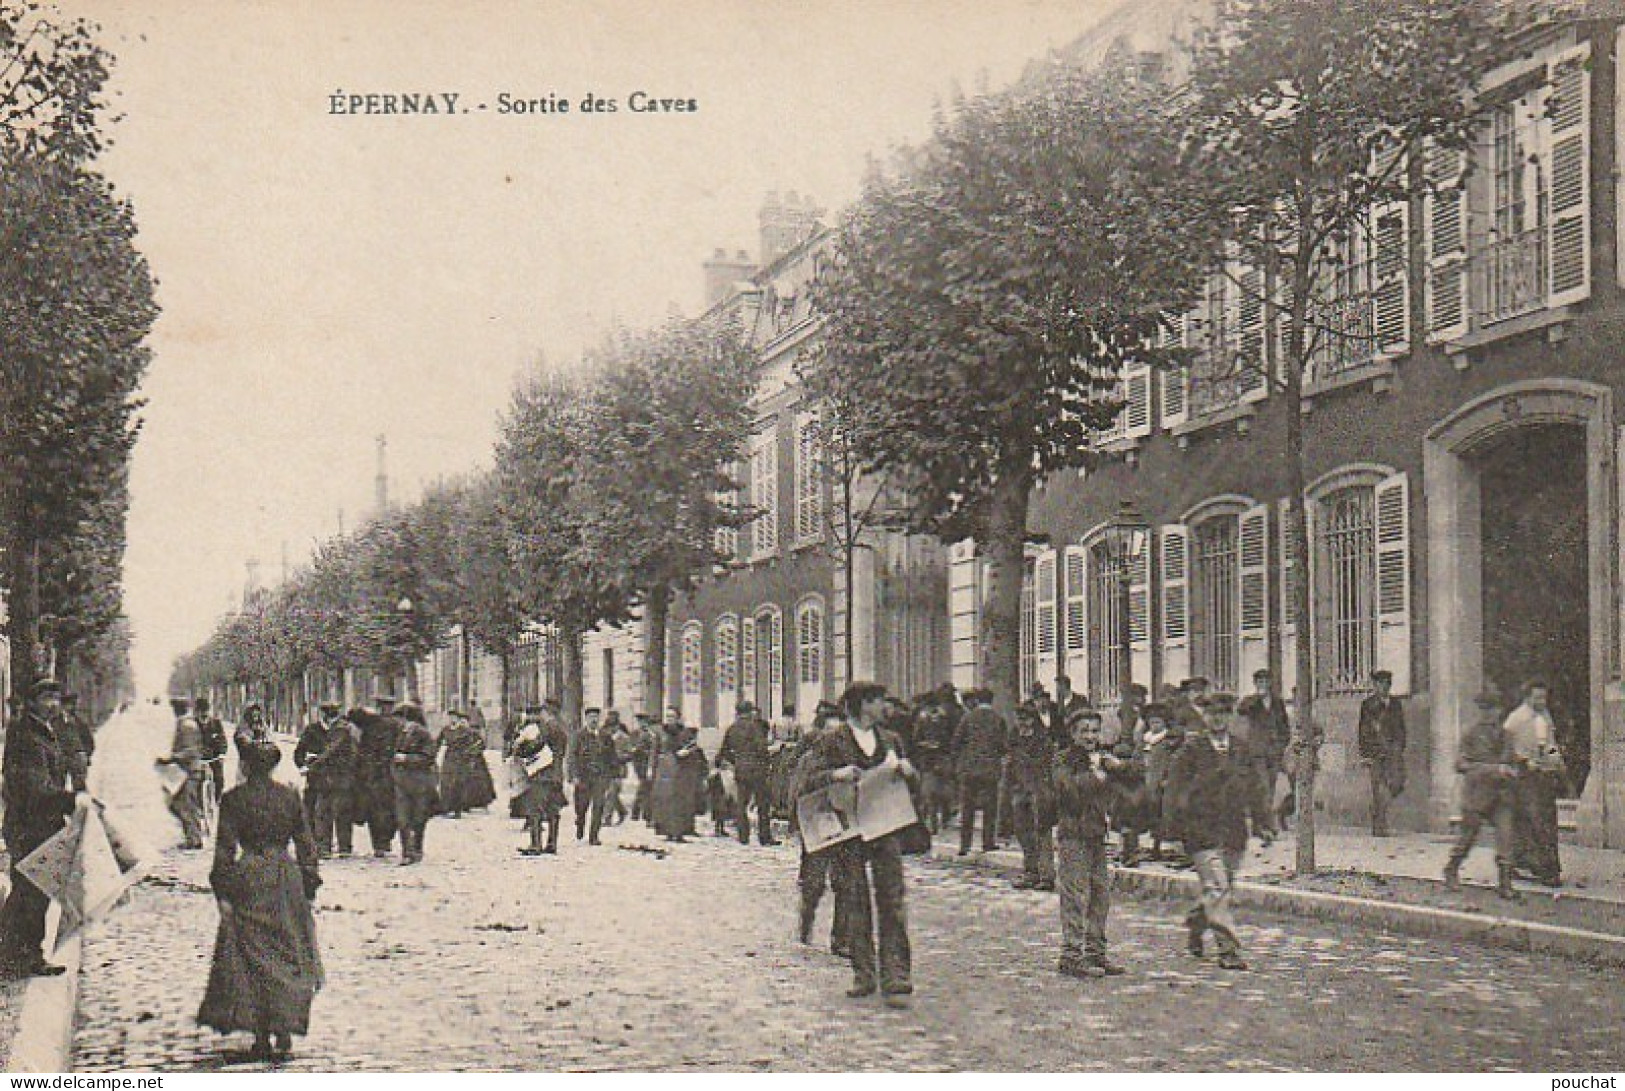 EP 24 -(51) EPERNAY  -  SORTIE DES CAVES  -  OUVRIERS , EMPLOYES  - 2 SCANS - Epernay